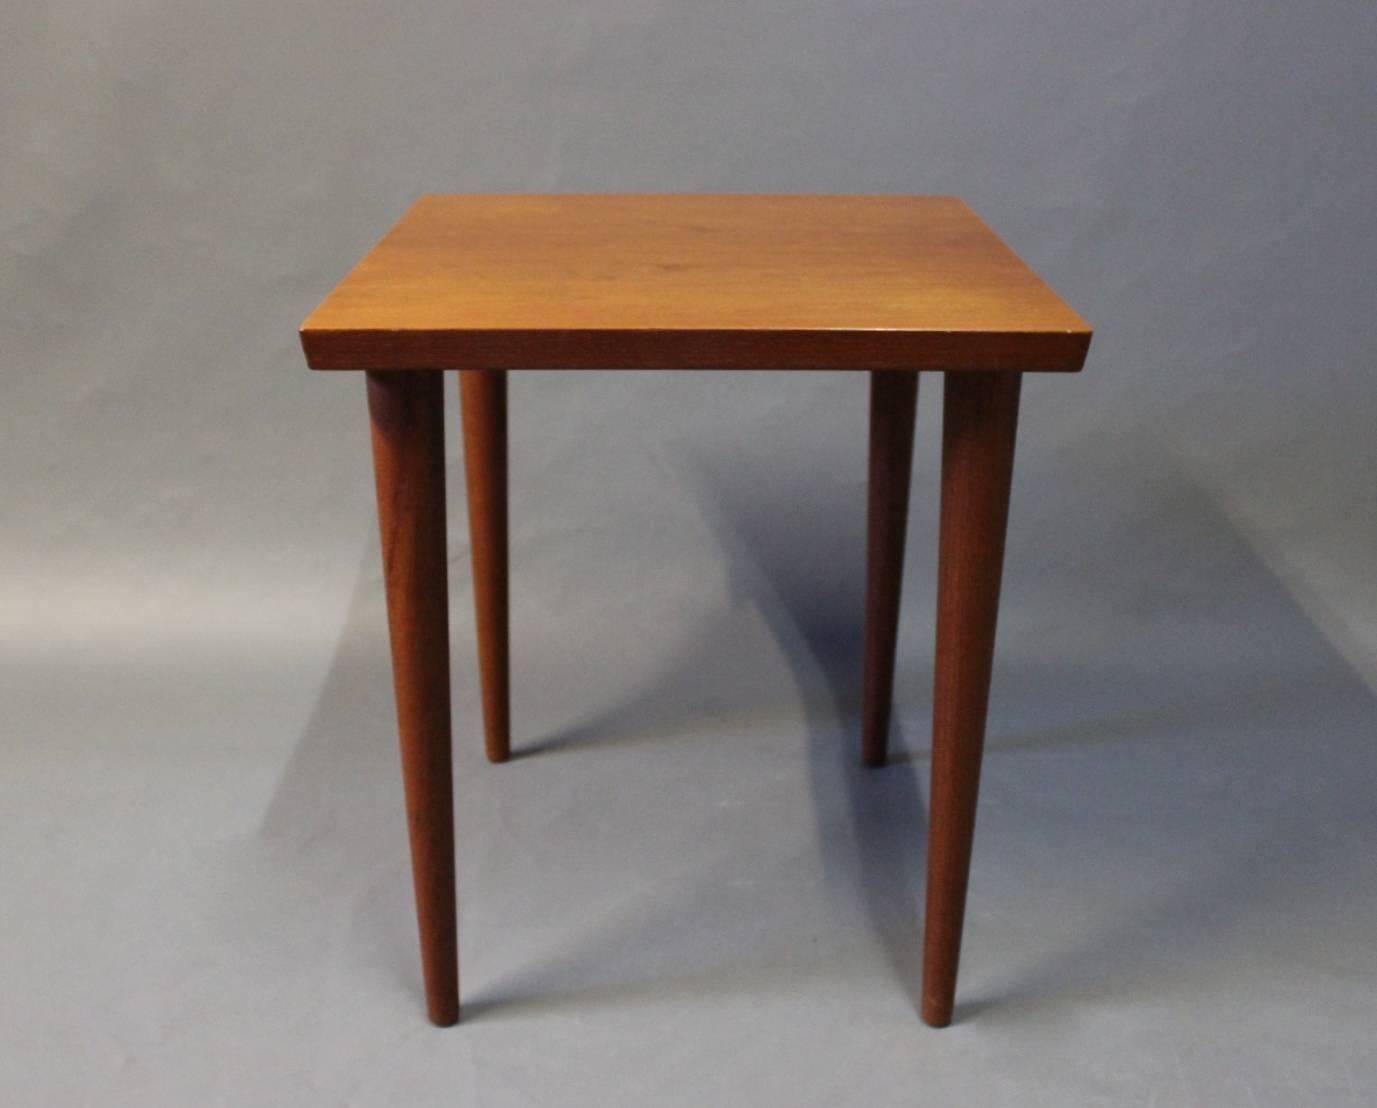 Small side table in teak designed by Finn Juhl and manufactured by France and Son in the 1960s. The table is in great vintage condition.